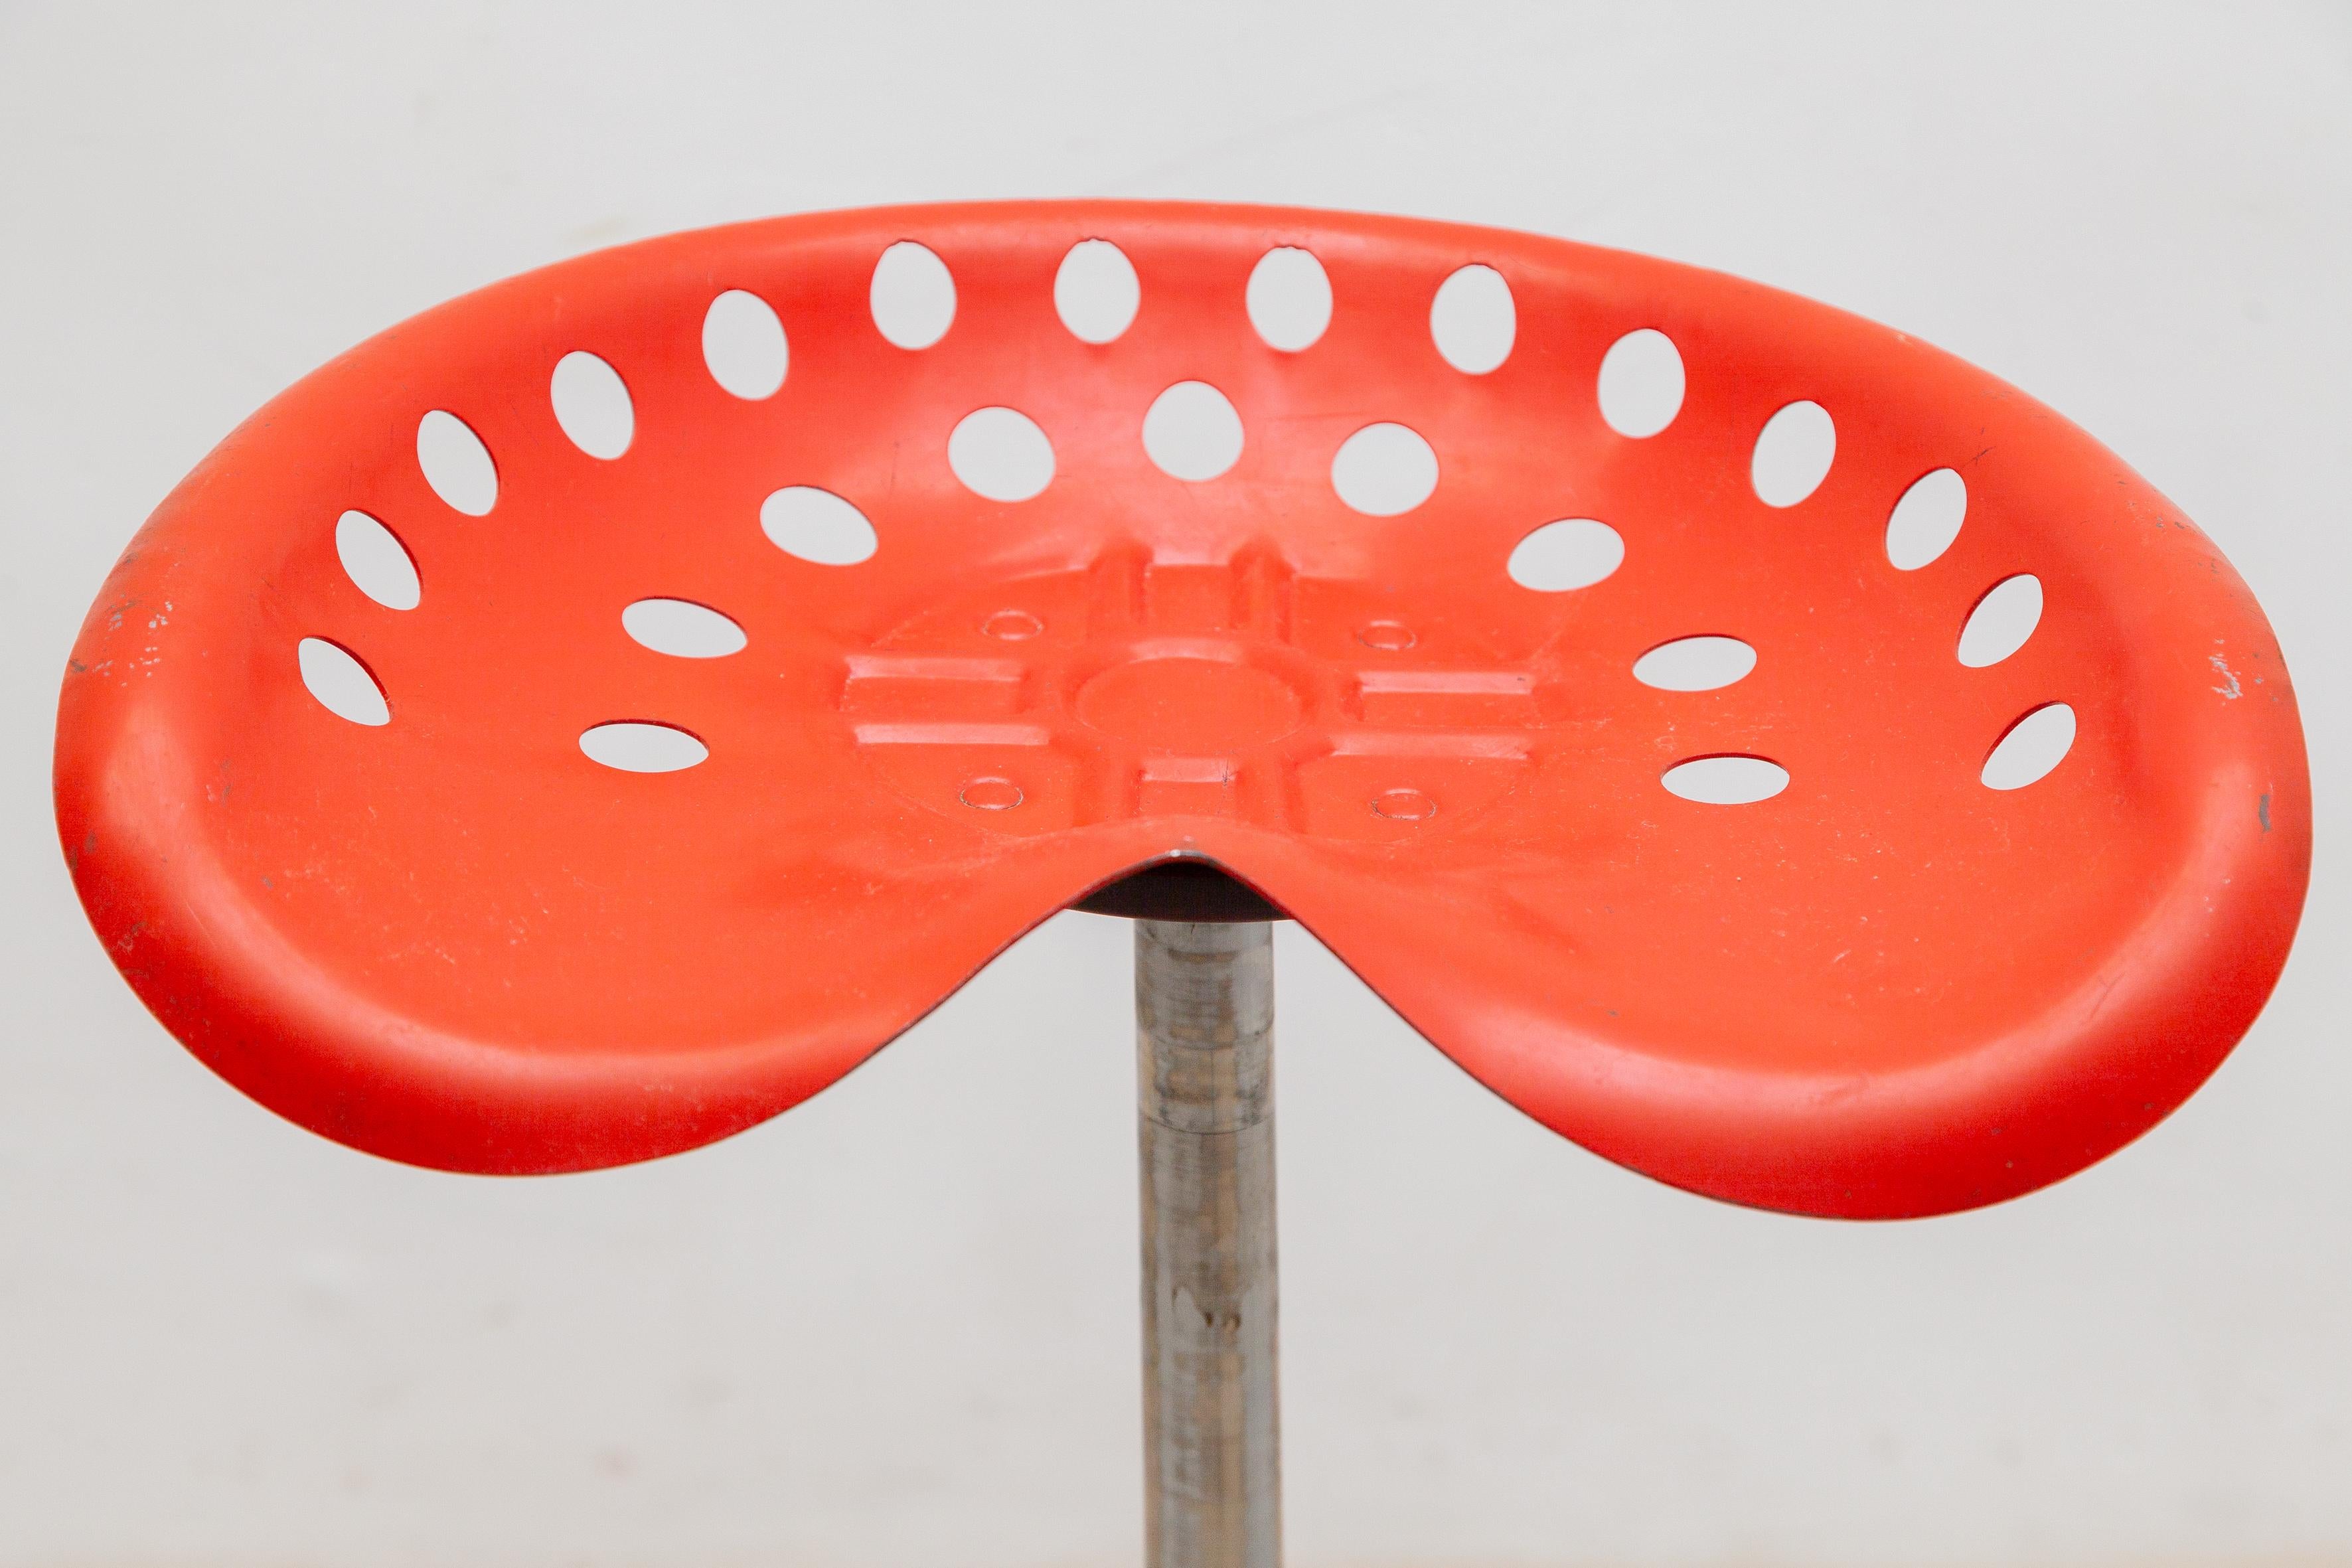 Red Tractor Seat Stool Designed by Etienne Fermigier for Mirima, France 1